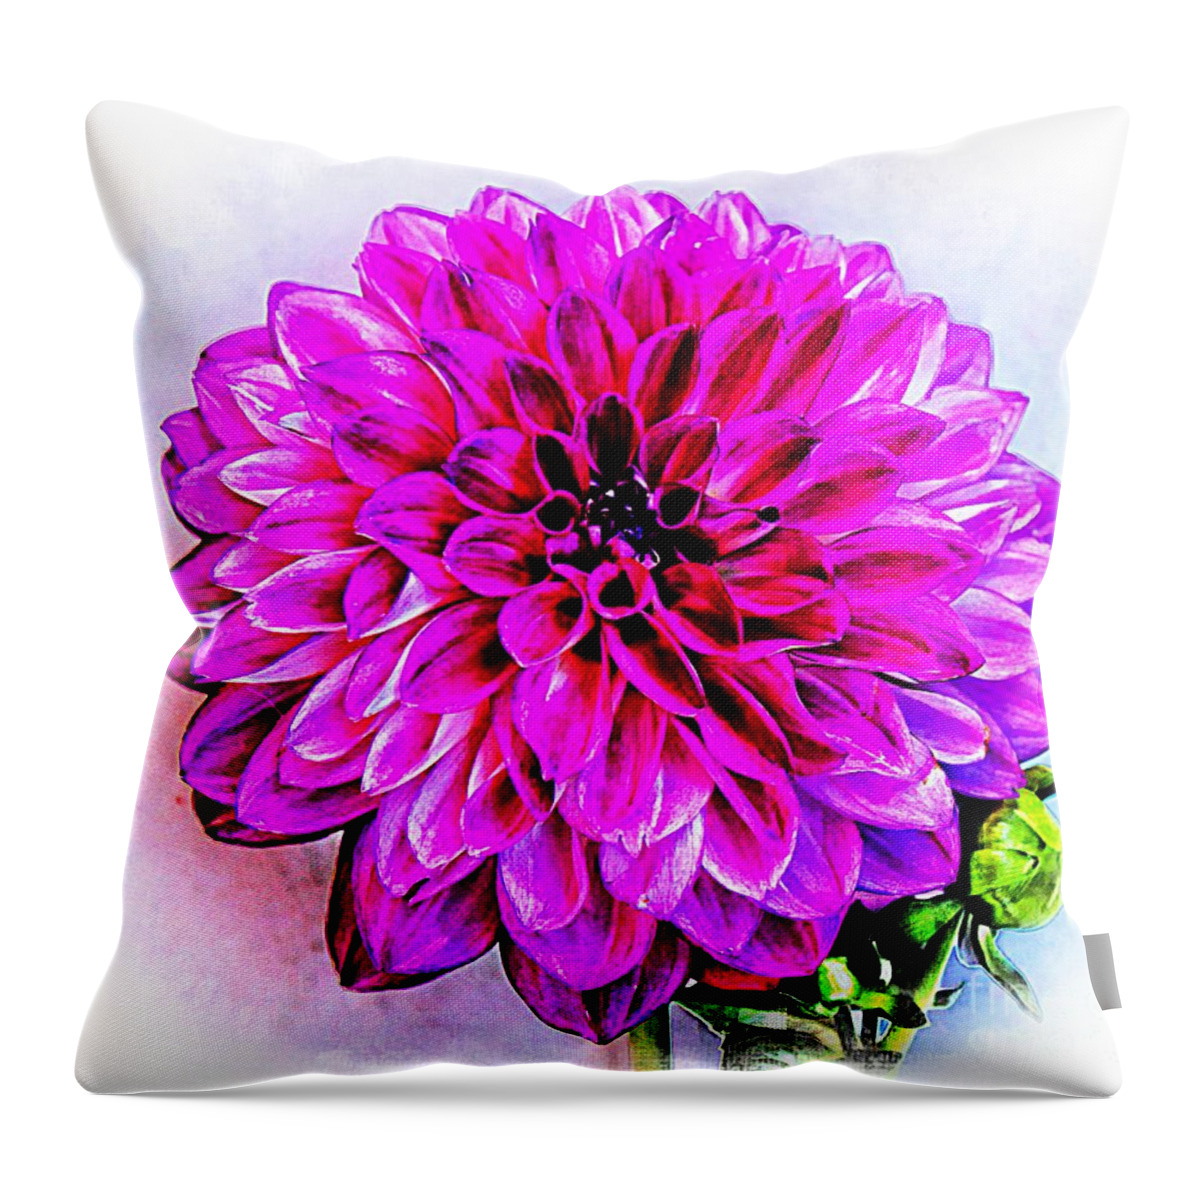 Dahlia Throw Pillow featuring the photograph A Painted Dahlia by Clare Bevan